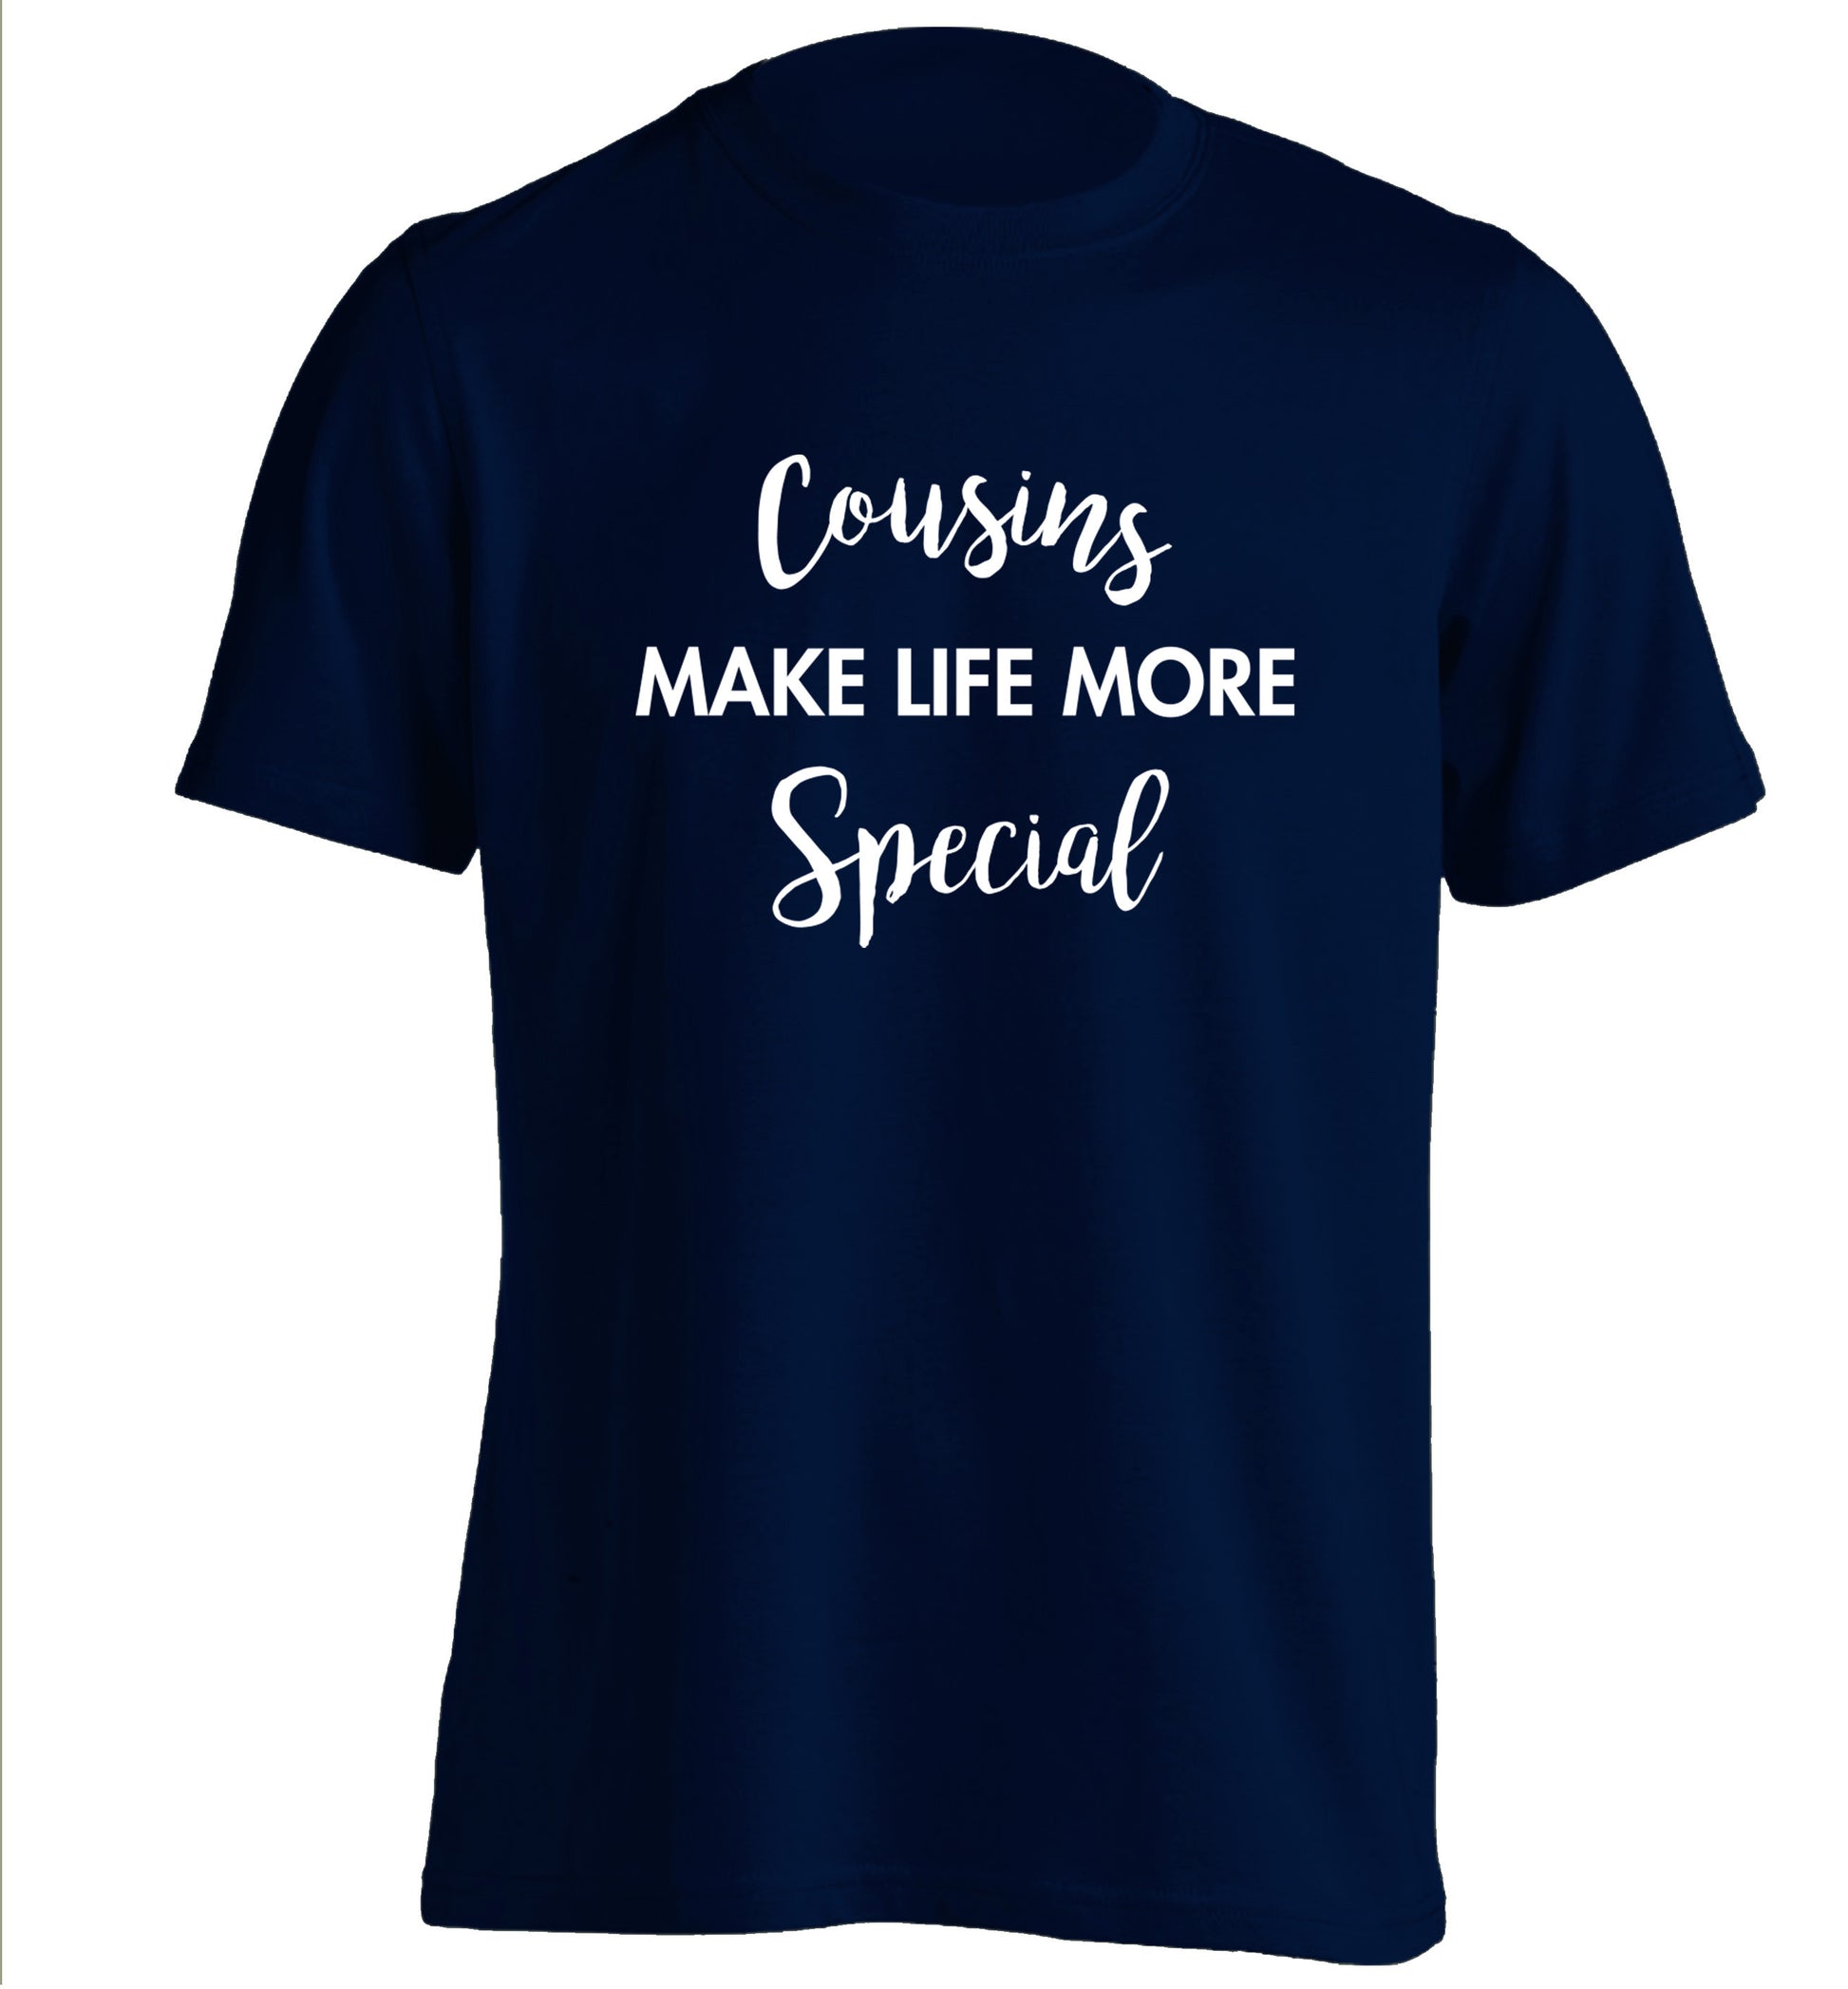 Cousins make life more special adults unisex navy Tshirt 2XL